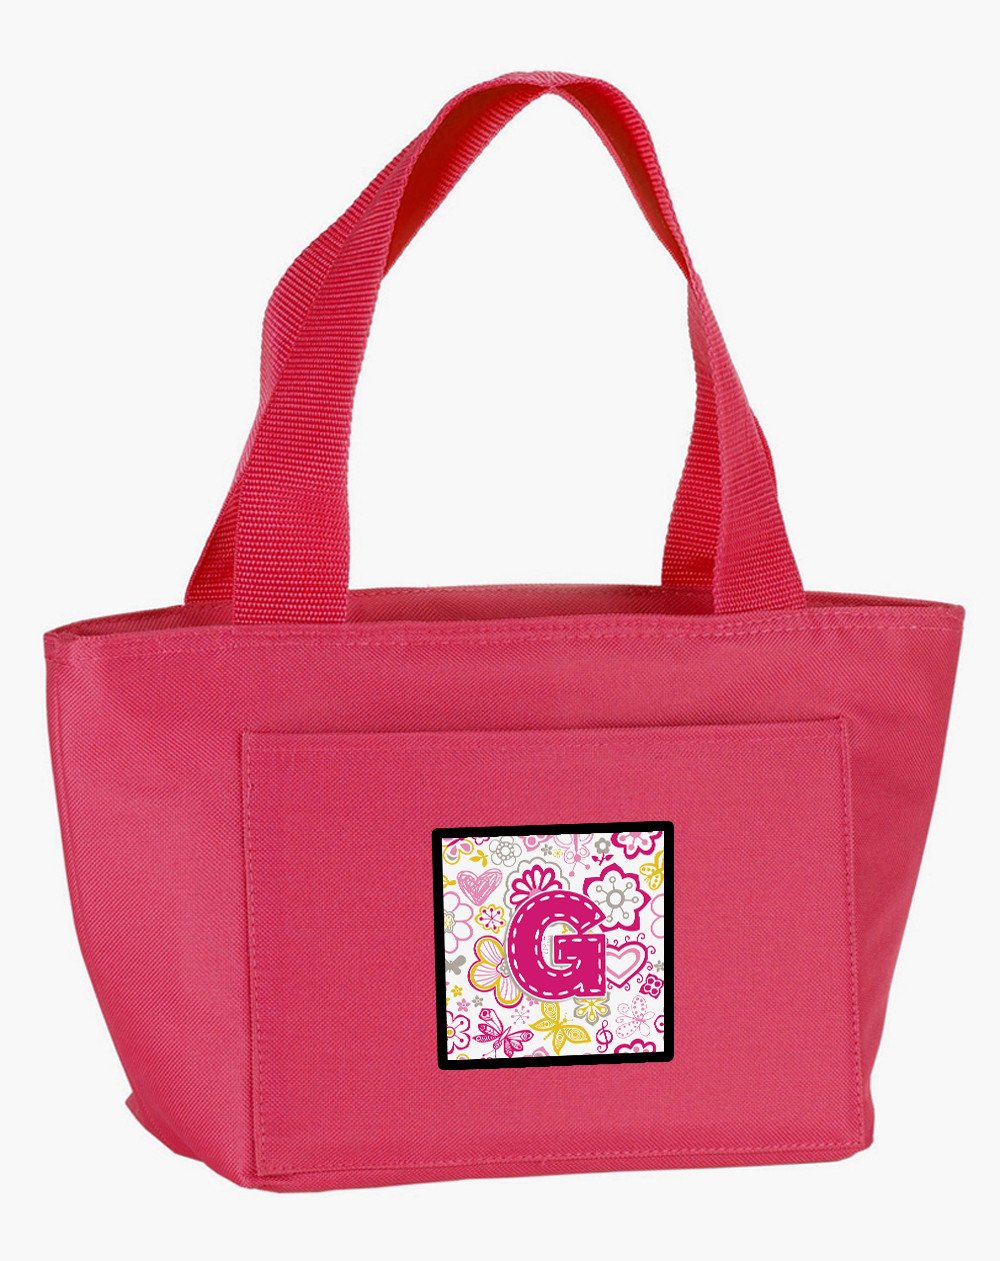 Letter G Flowers and Butterflies Pink Lunch Bag CJ2005-GPK-8808 by Caroline's Treasures